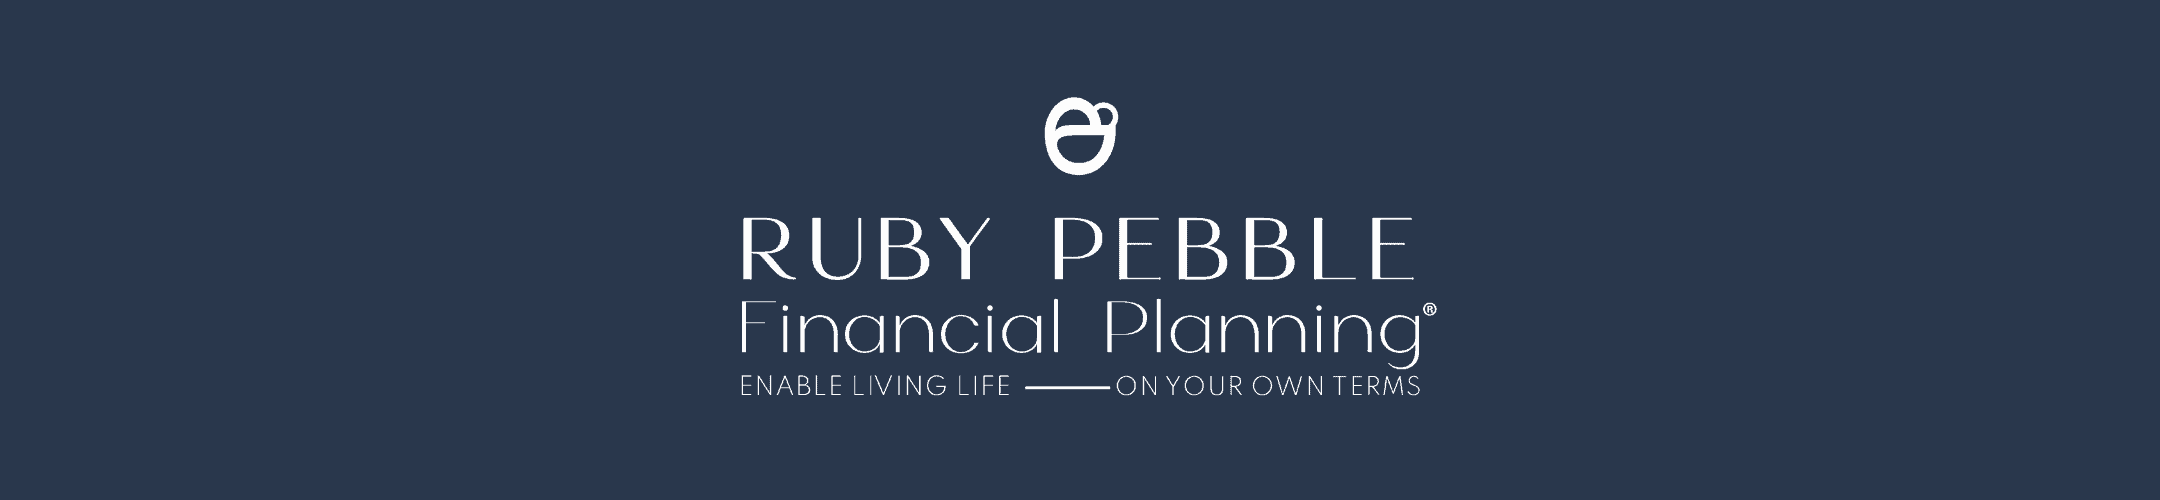 Ruby pebble financial planning: empower your life by managing your finances on your own terms.